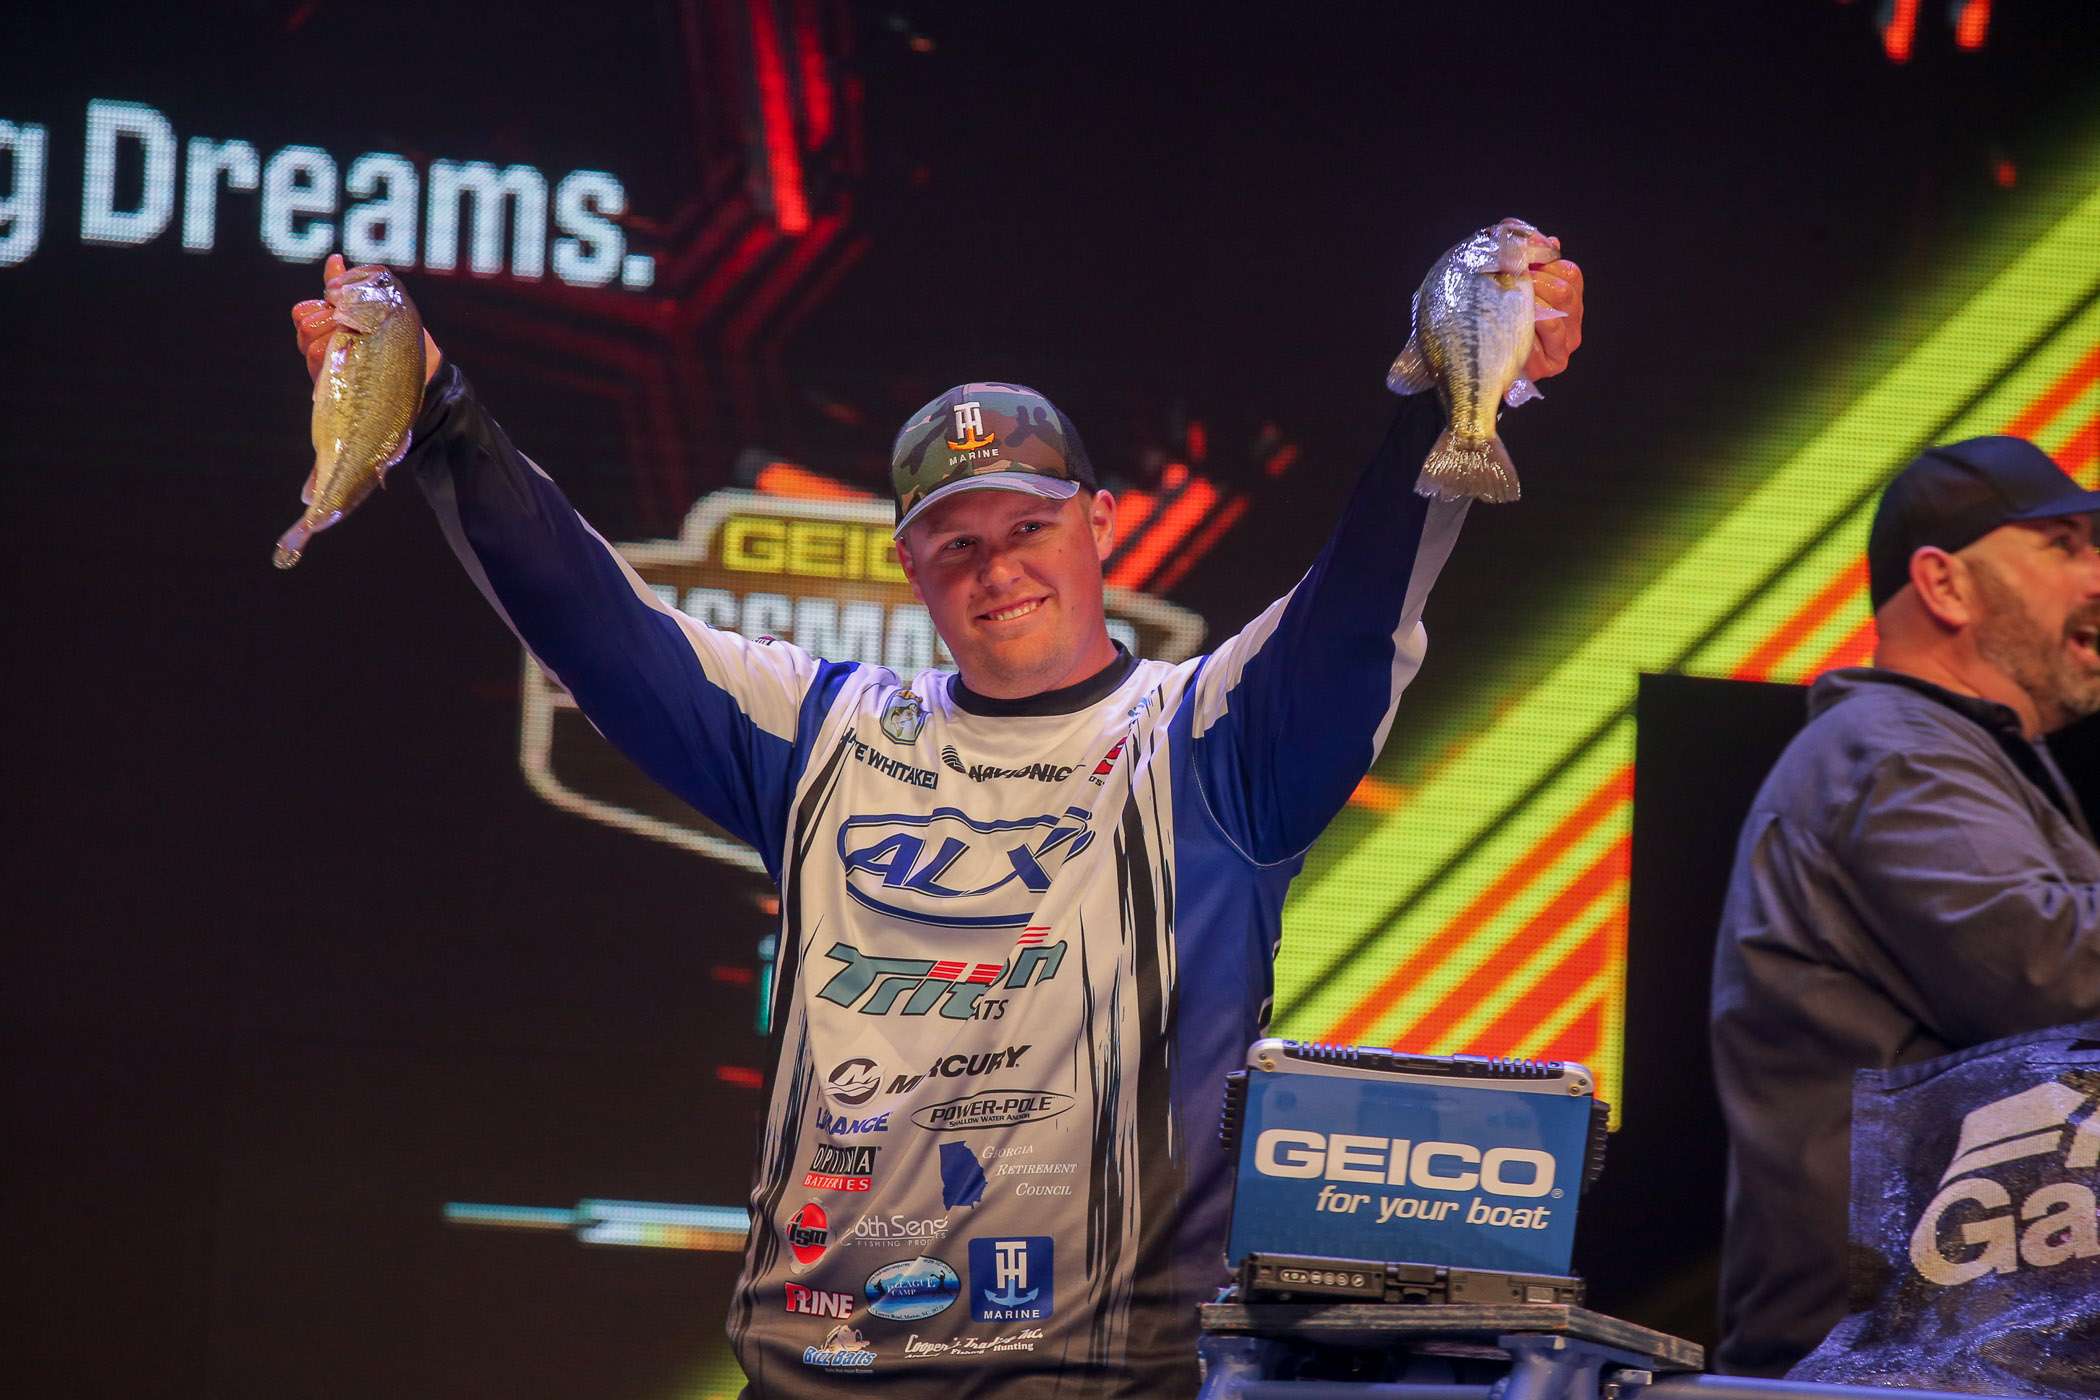 I didn't punch my ticket to the Classic through the College Bracket, but making it through the rigorous Elite Series showed me a lot about myself. I was nervous but I think I was more prepared than I would've been if I came straight from the College Bracket. I had a year of fishing against these anglers under my belt and it made me savor the moment a lot.